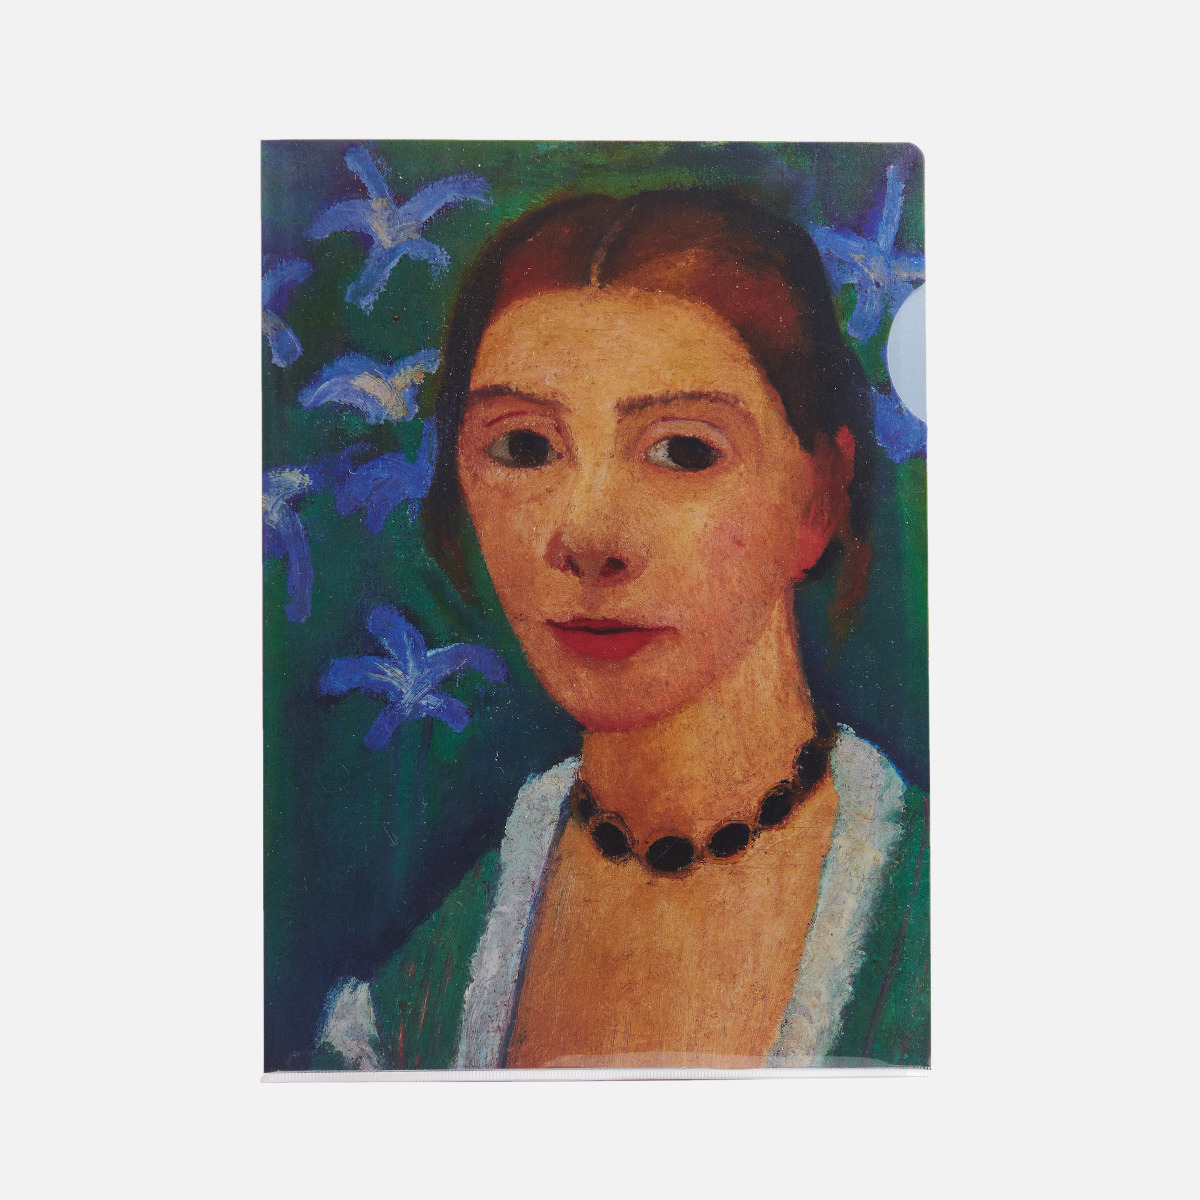 Self-Portrait in front of a Green Background with Blue Iris,1900–07, folder